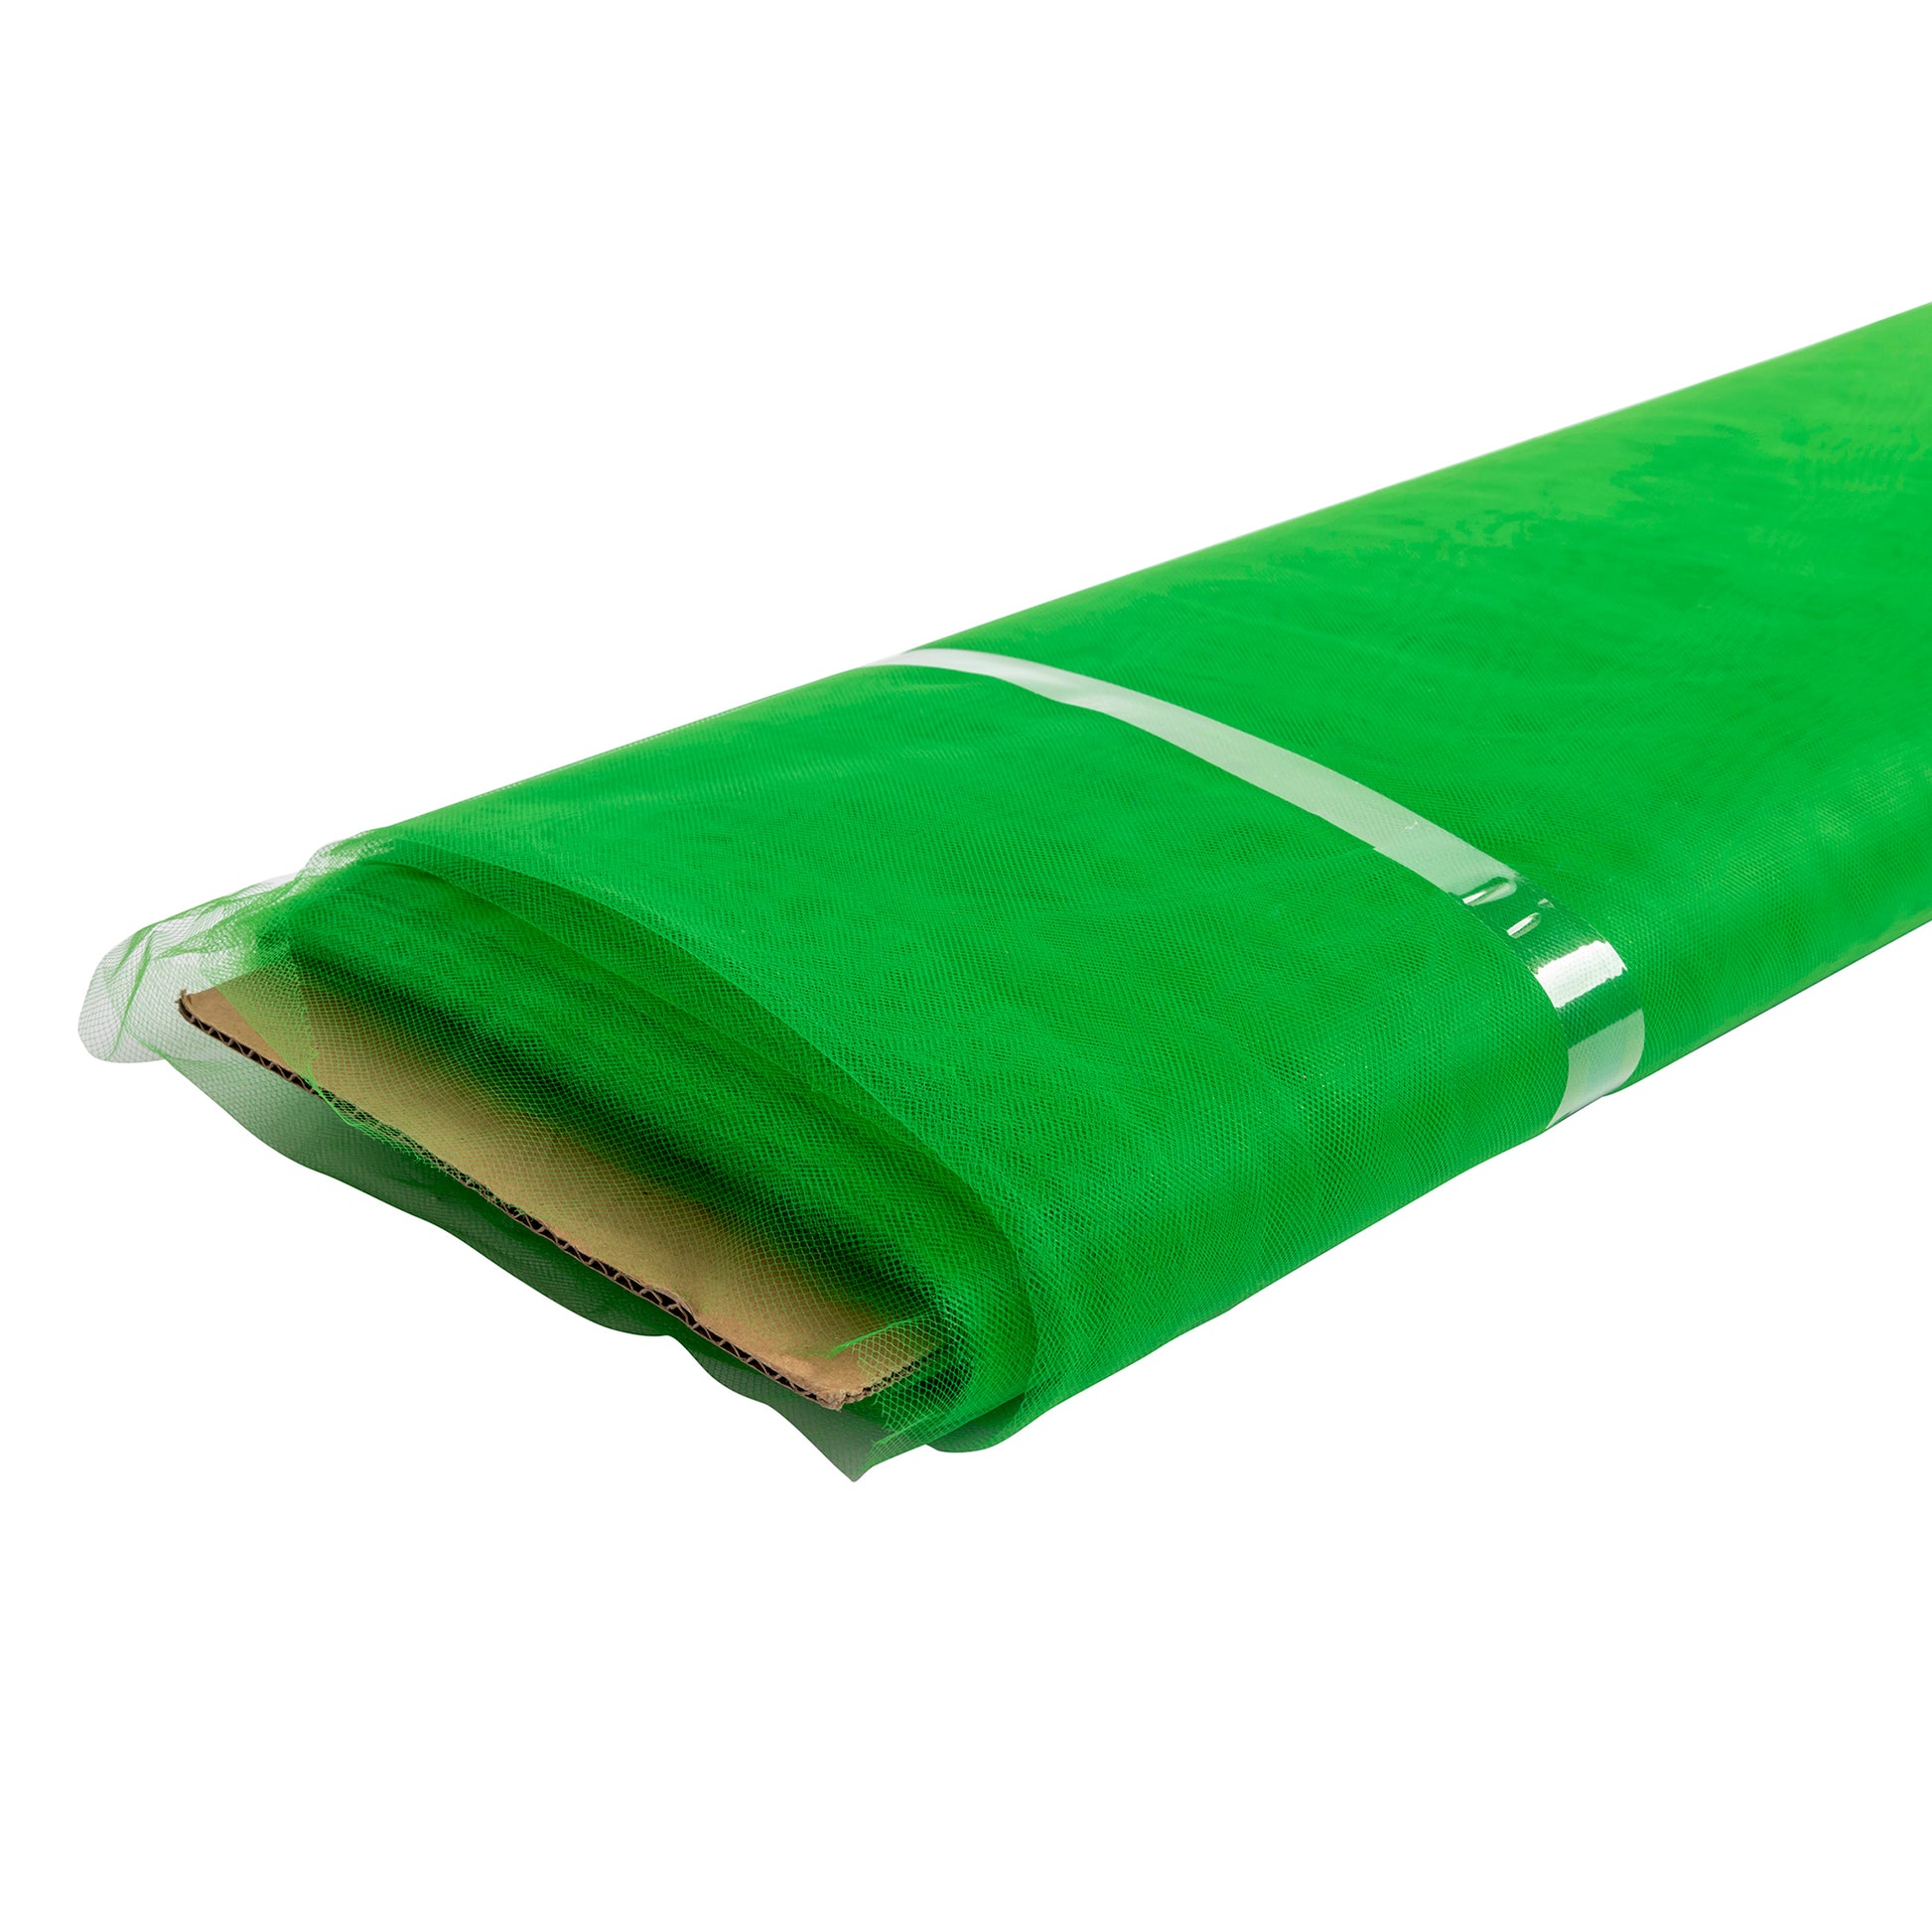 Soft Tulle Fabric Roll 54" x 40 yds - Kelly Green